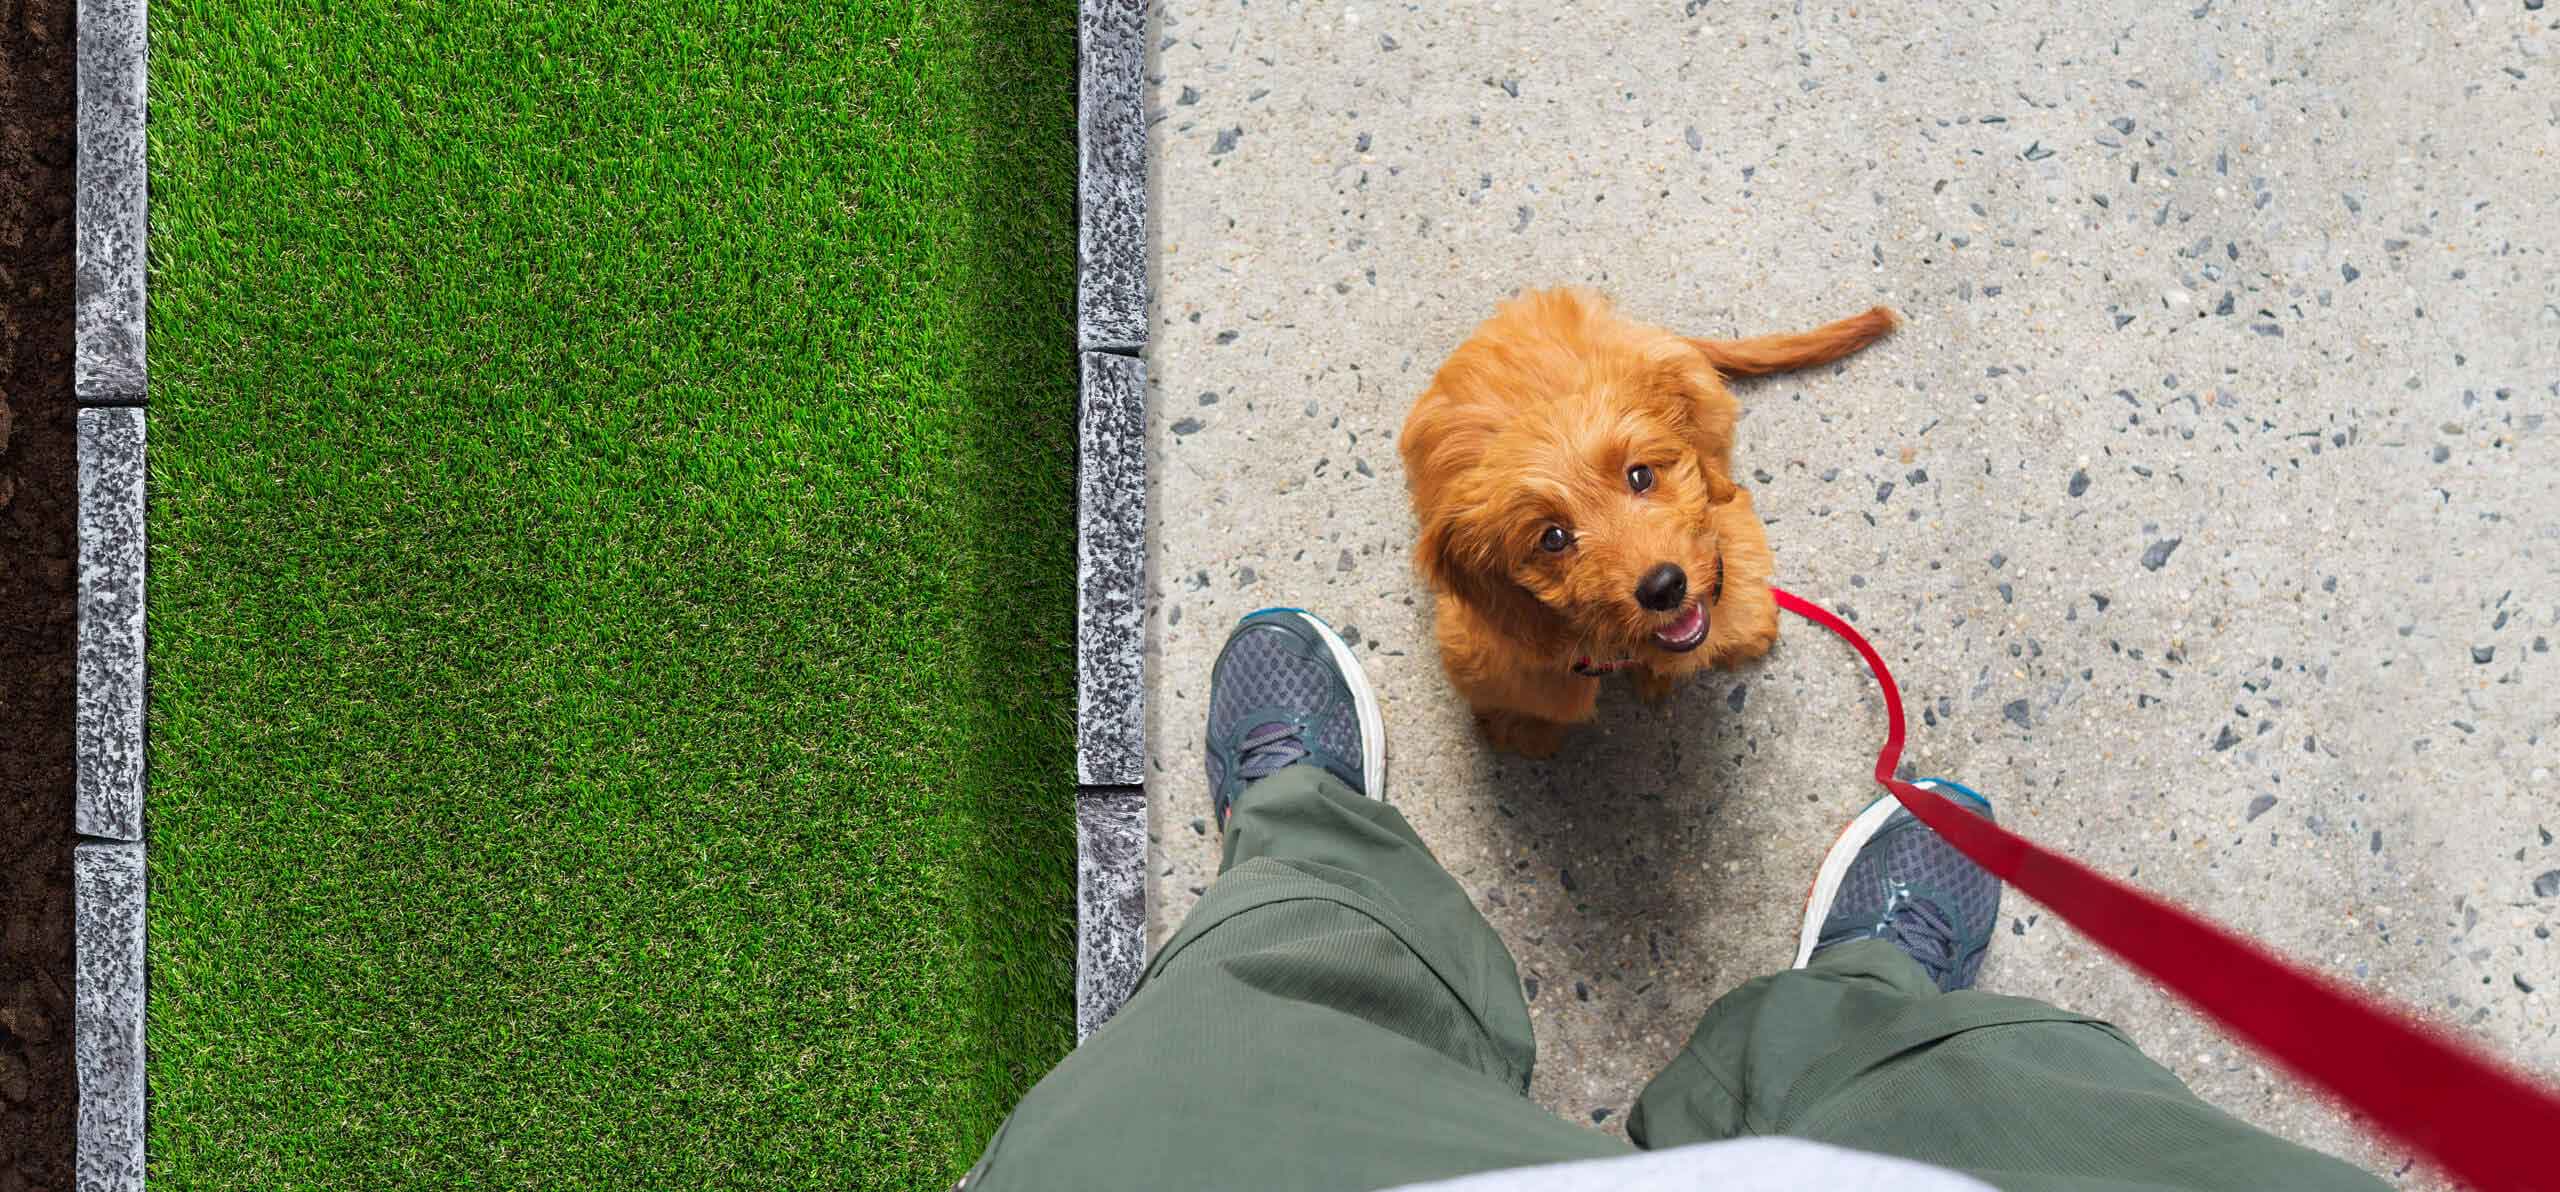 orange puppy looking up at owner with a red leash on